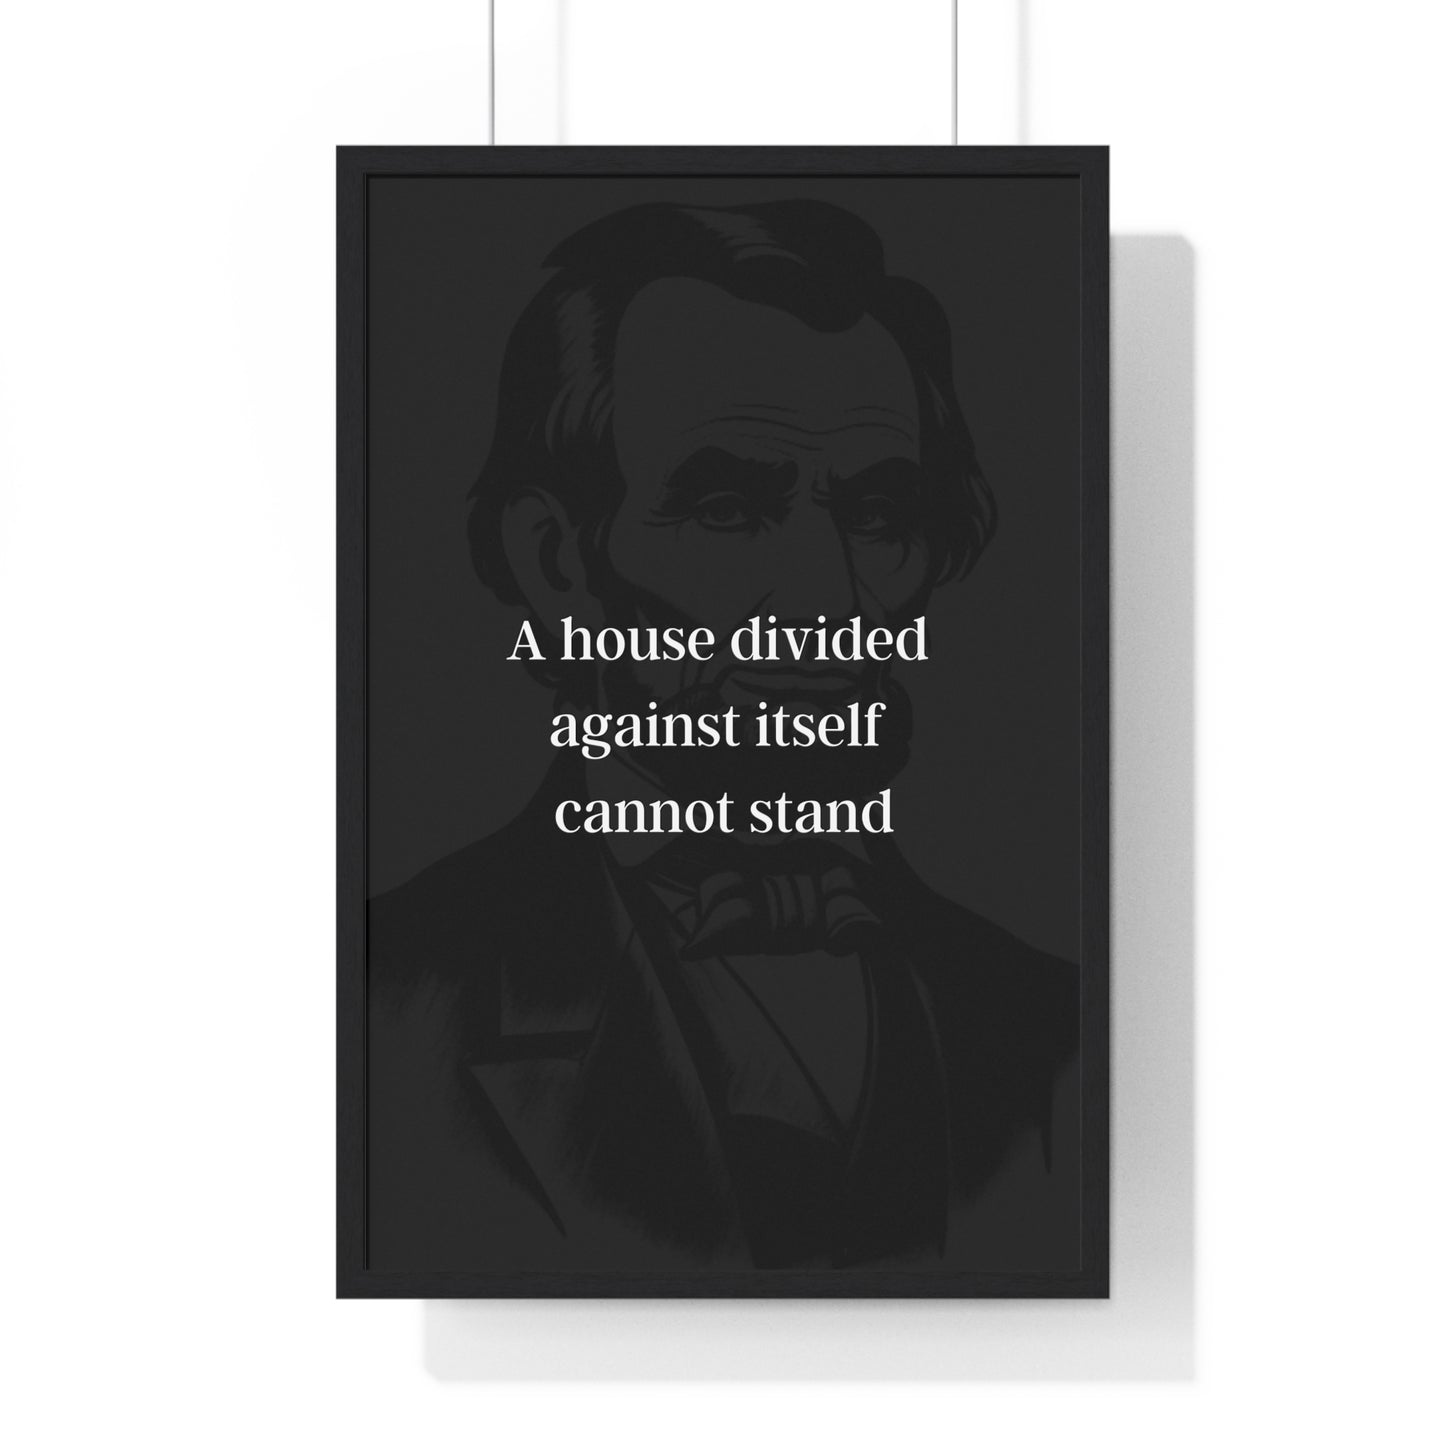 Abraham Lincoln Quote 6, Poster Art, Dark Print, 16th President of the United States, American Patriots, AI Art, Political Art, Poster Prints, Presidential Portraits, Presidential Quotes, Inspirational Quotes